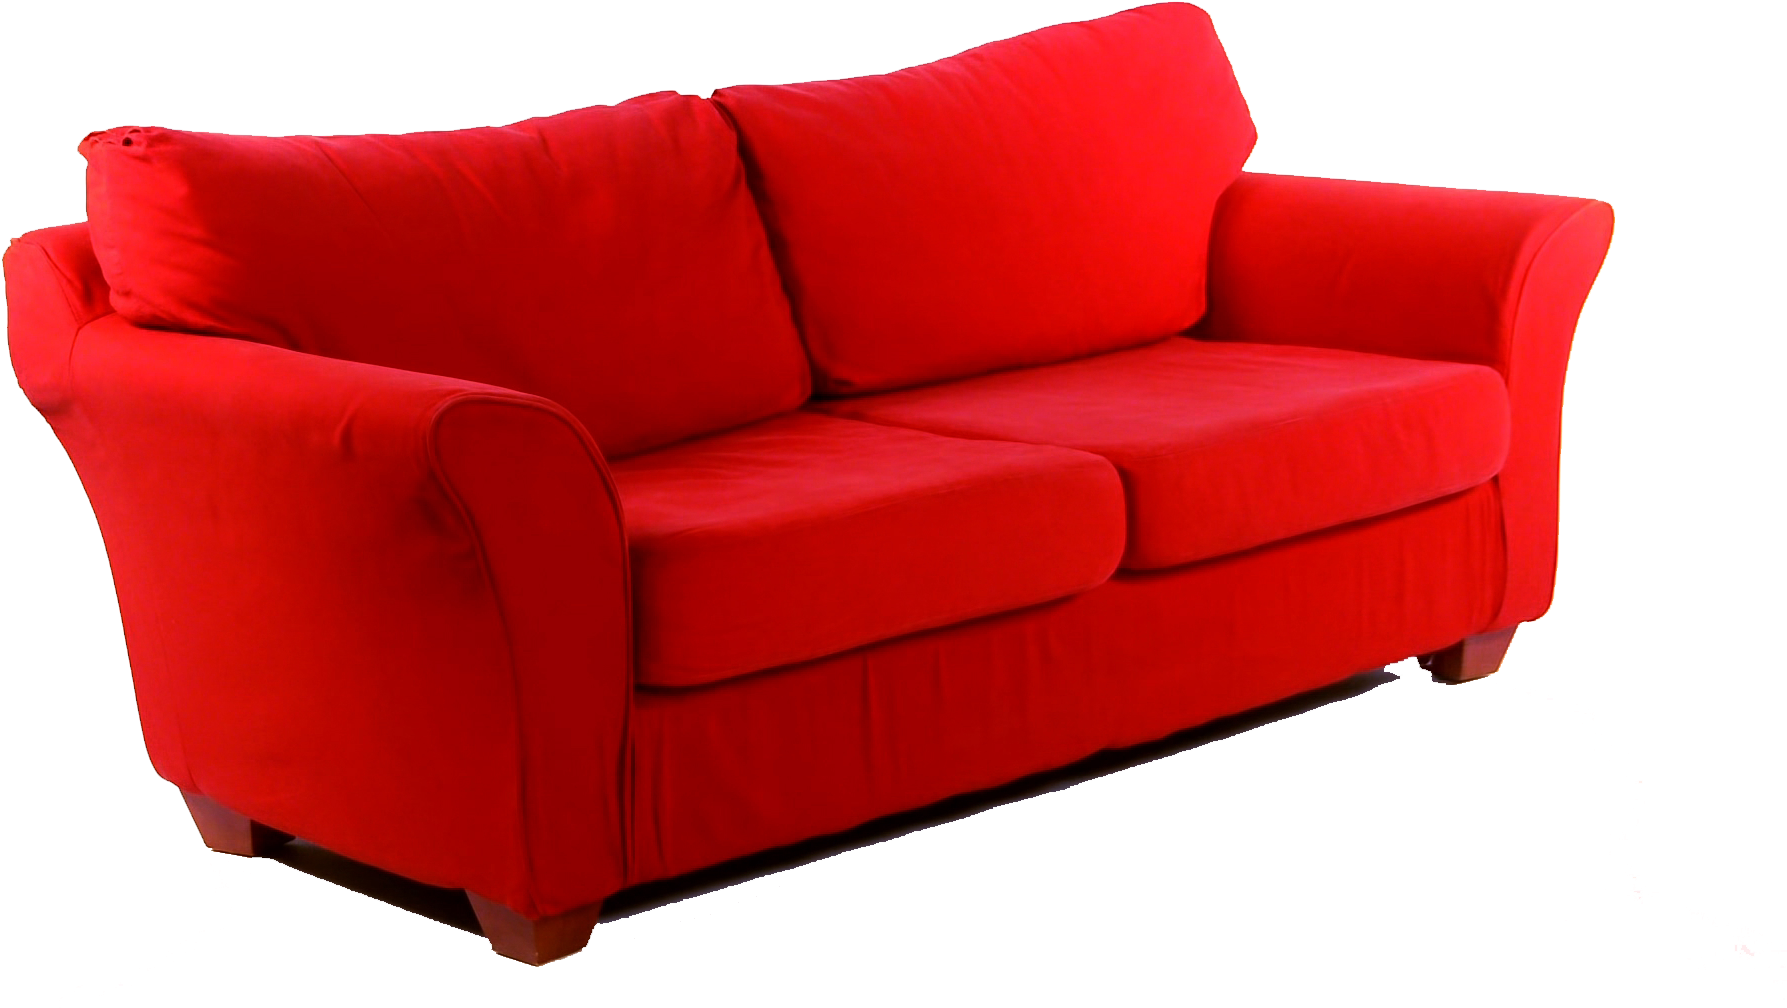 Red Couch Campaign Kicking Off In Birmingham Animal - Couch (1920x1080)